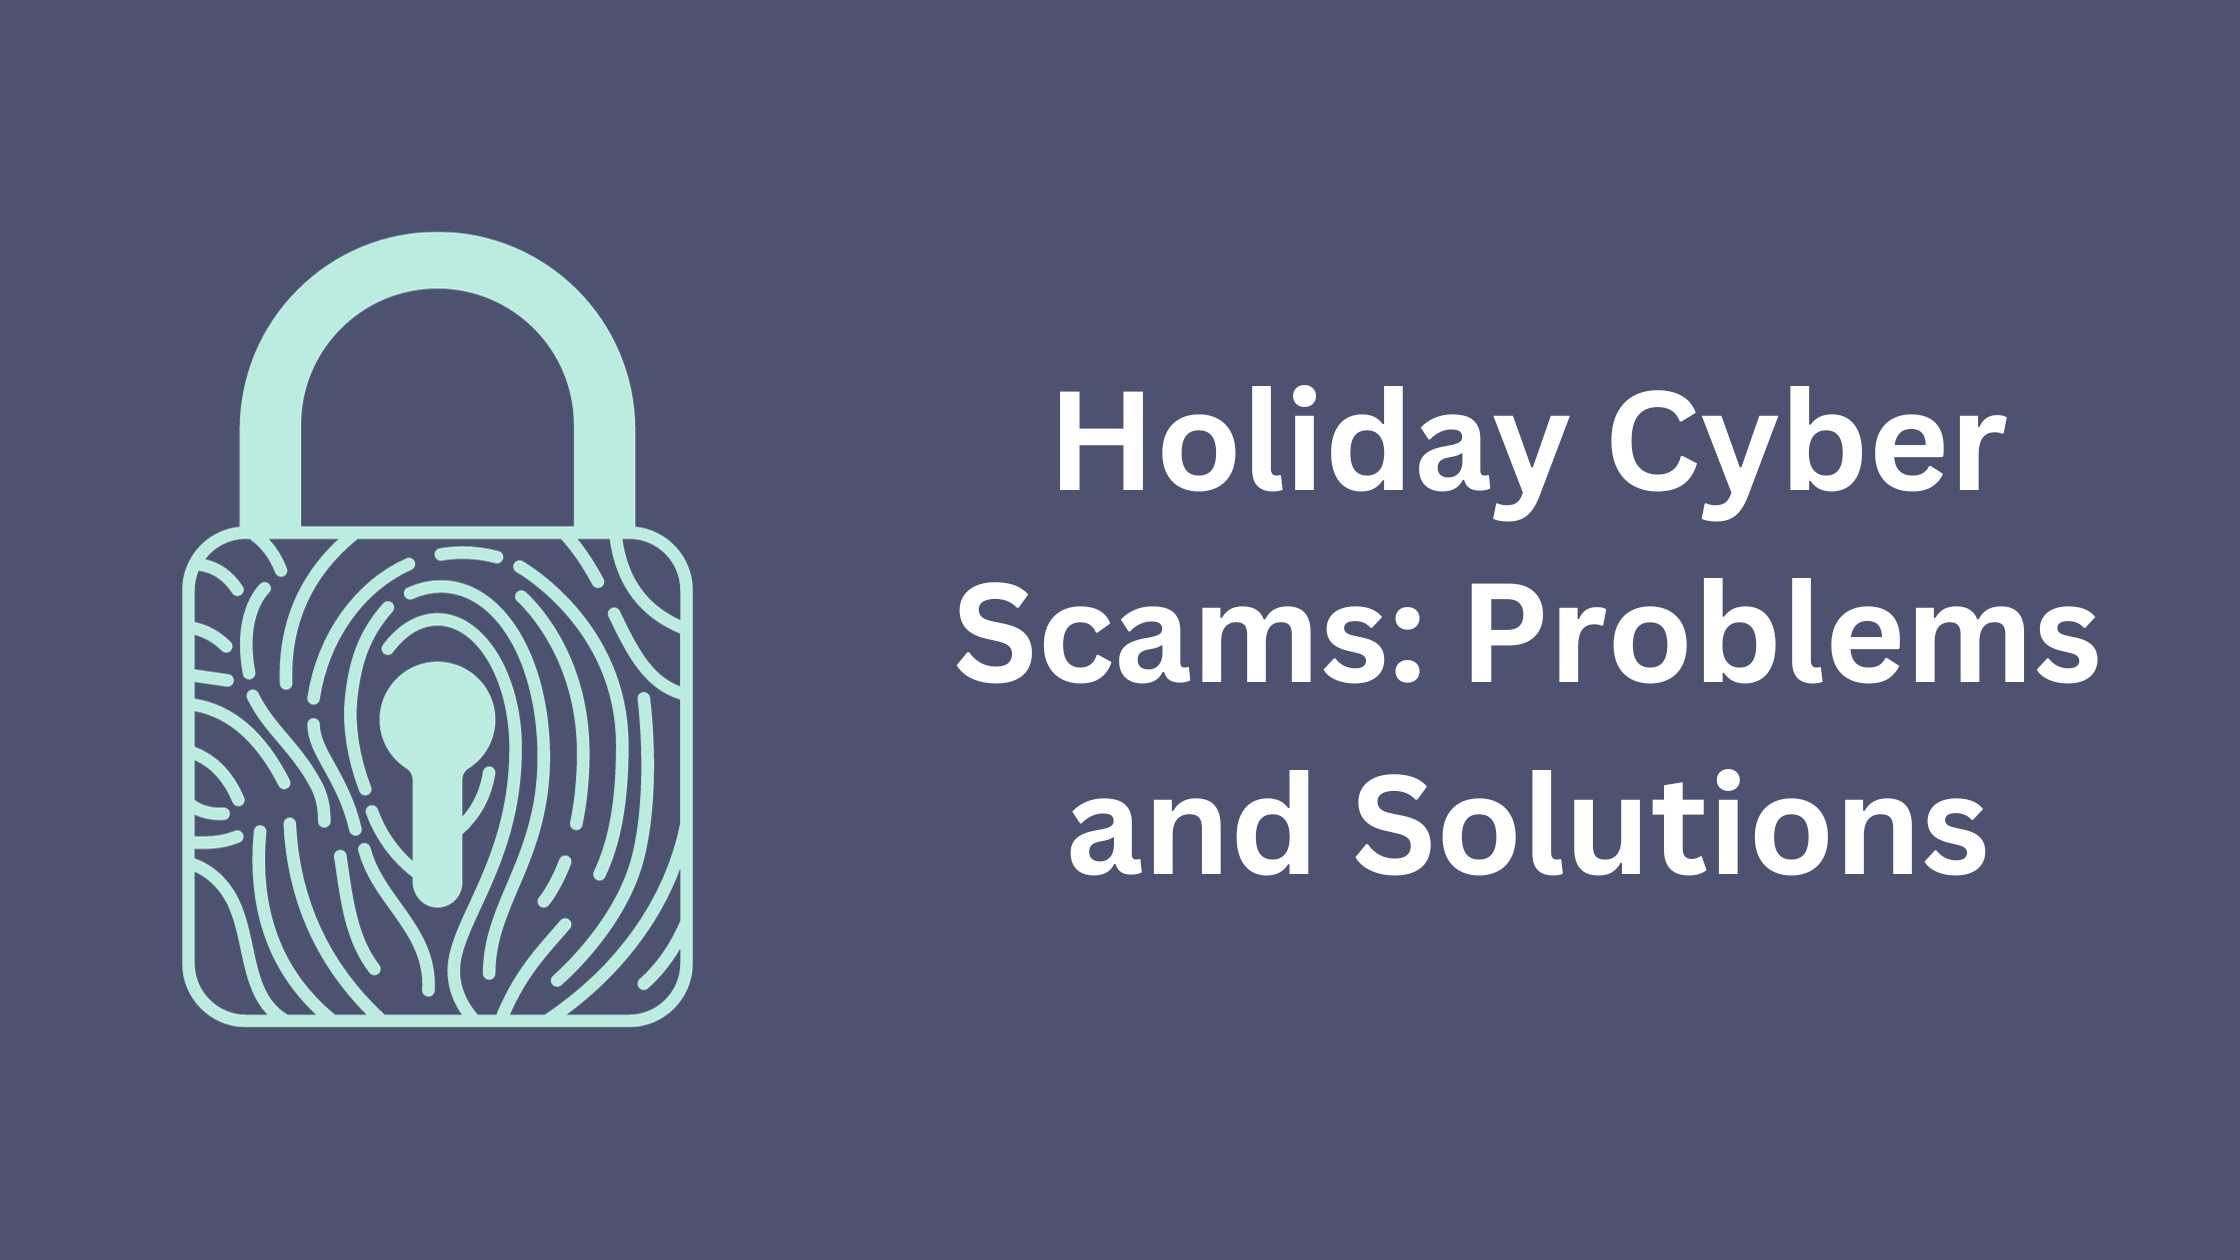 Holiday Cyber Scams: Problems and Solutions